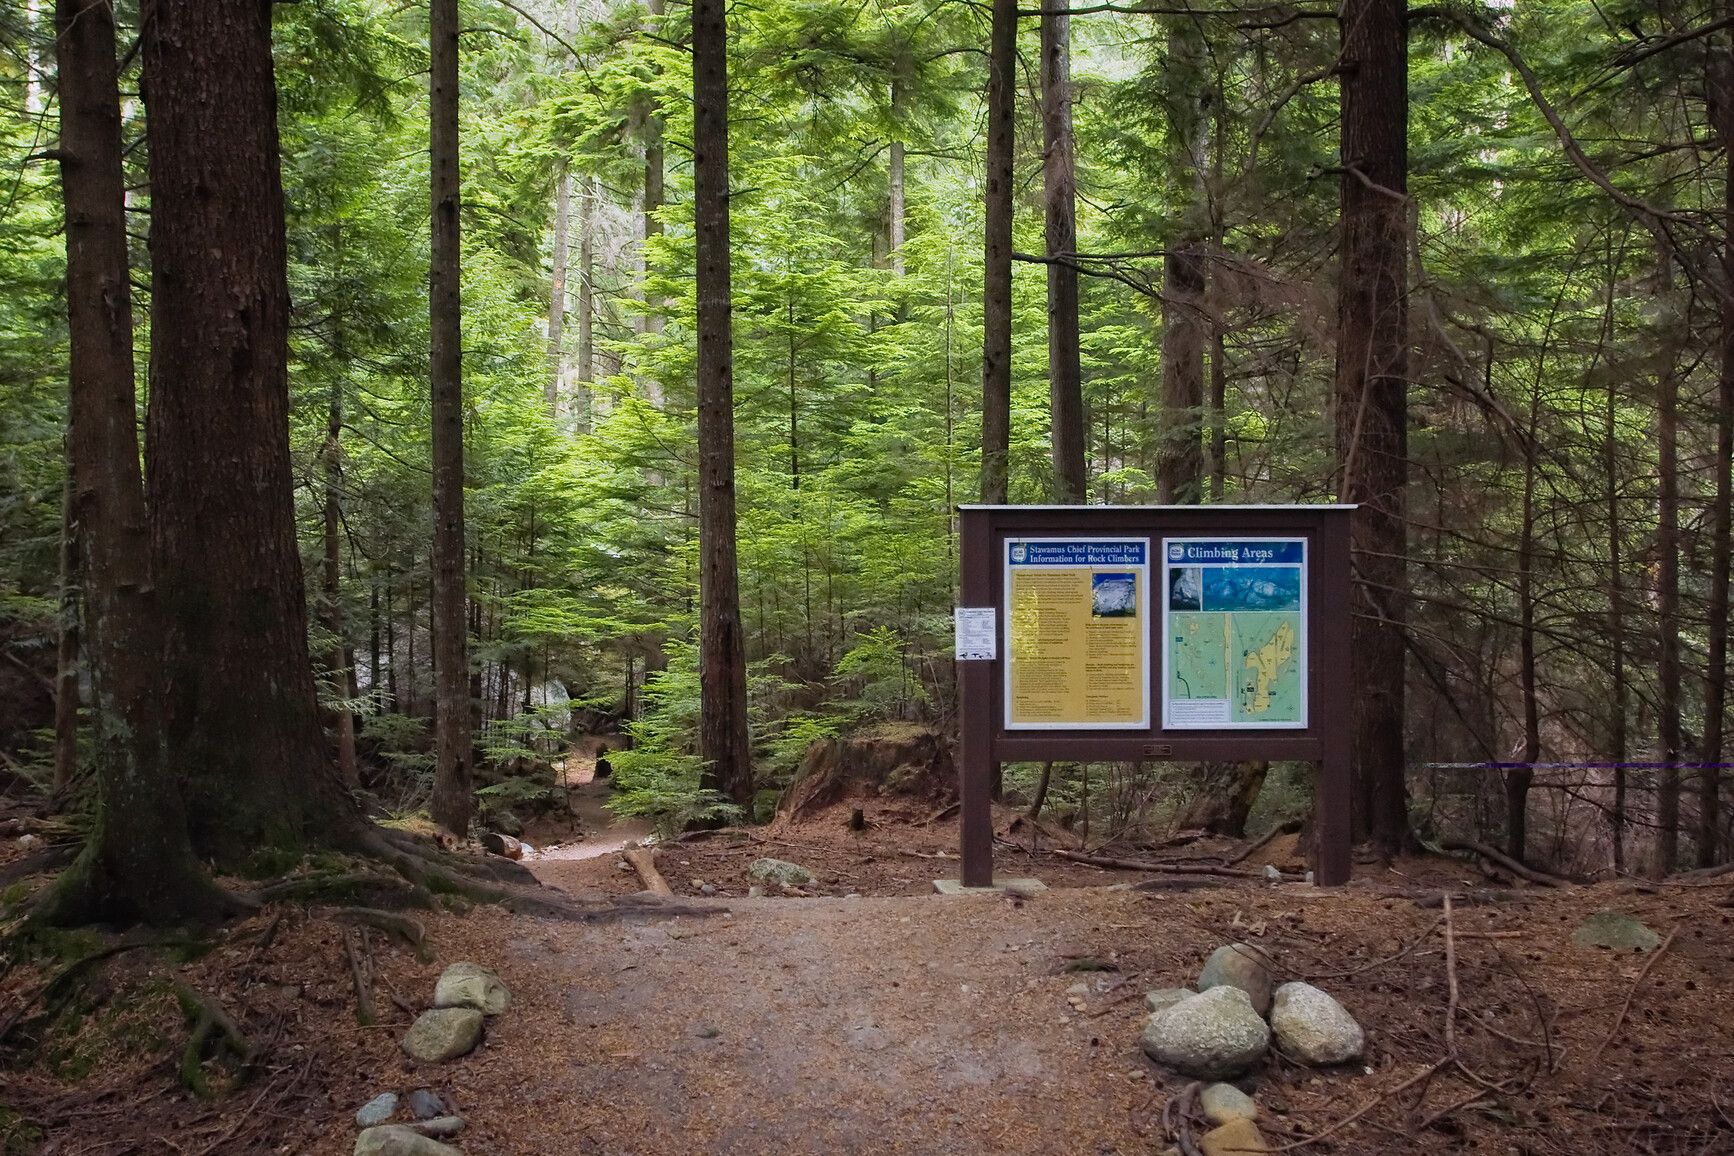 Park sign in forest at the entrance of a trail. Stawamus Chief Park.